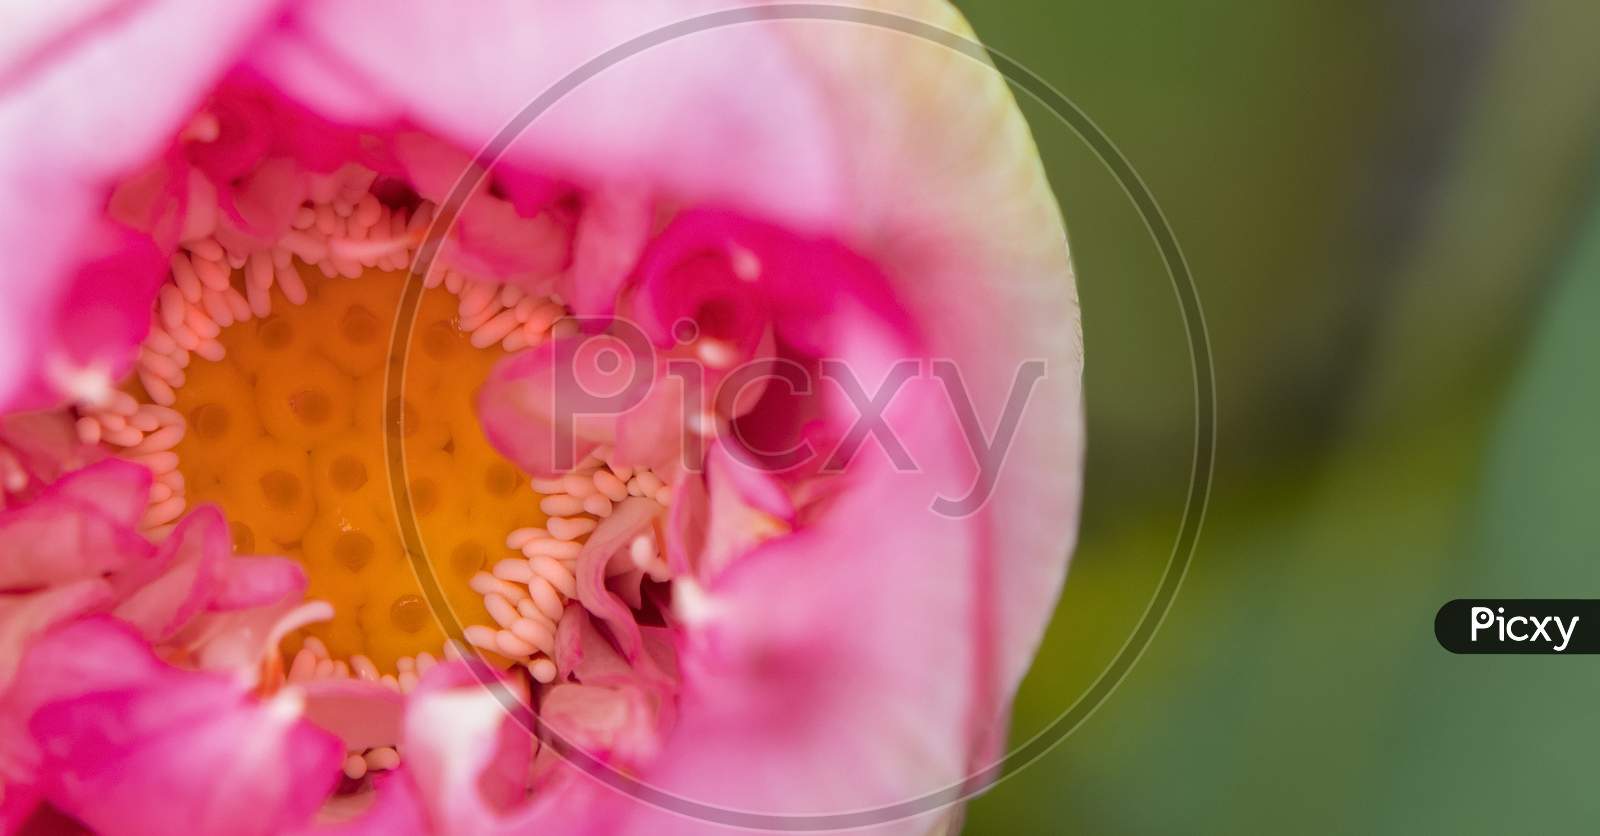 Pink Petals Of Lotus In A Beautiful Pattern In A Green Background